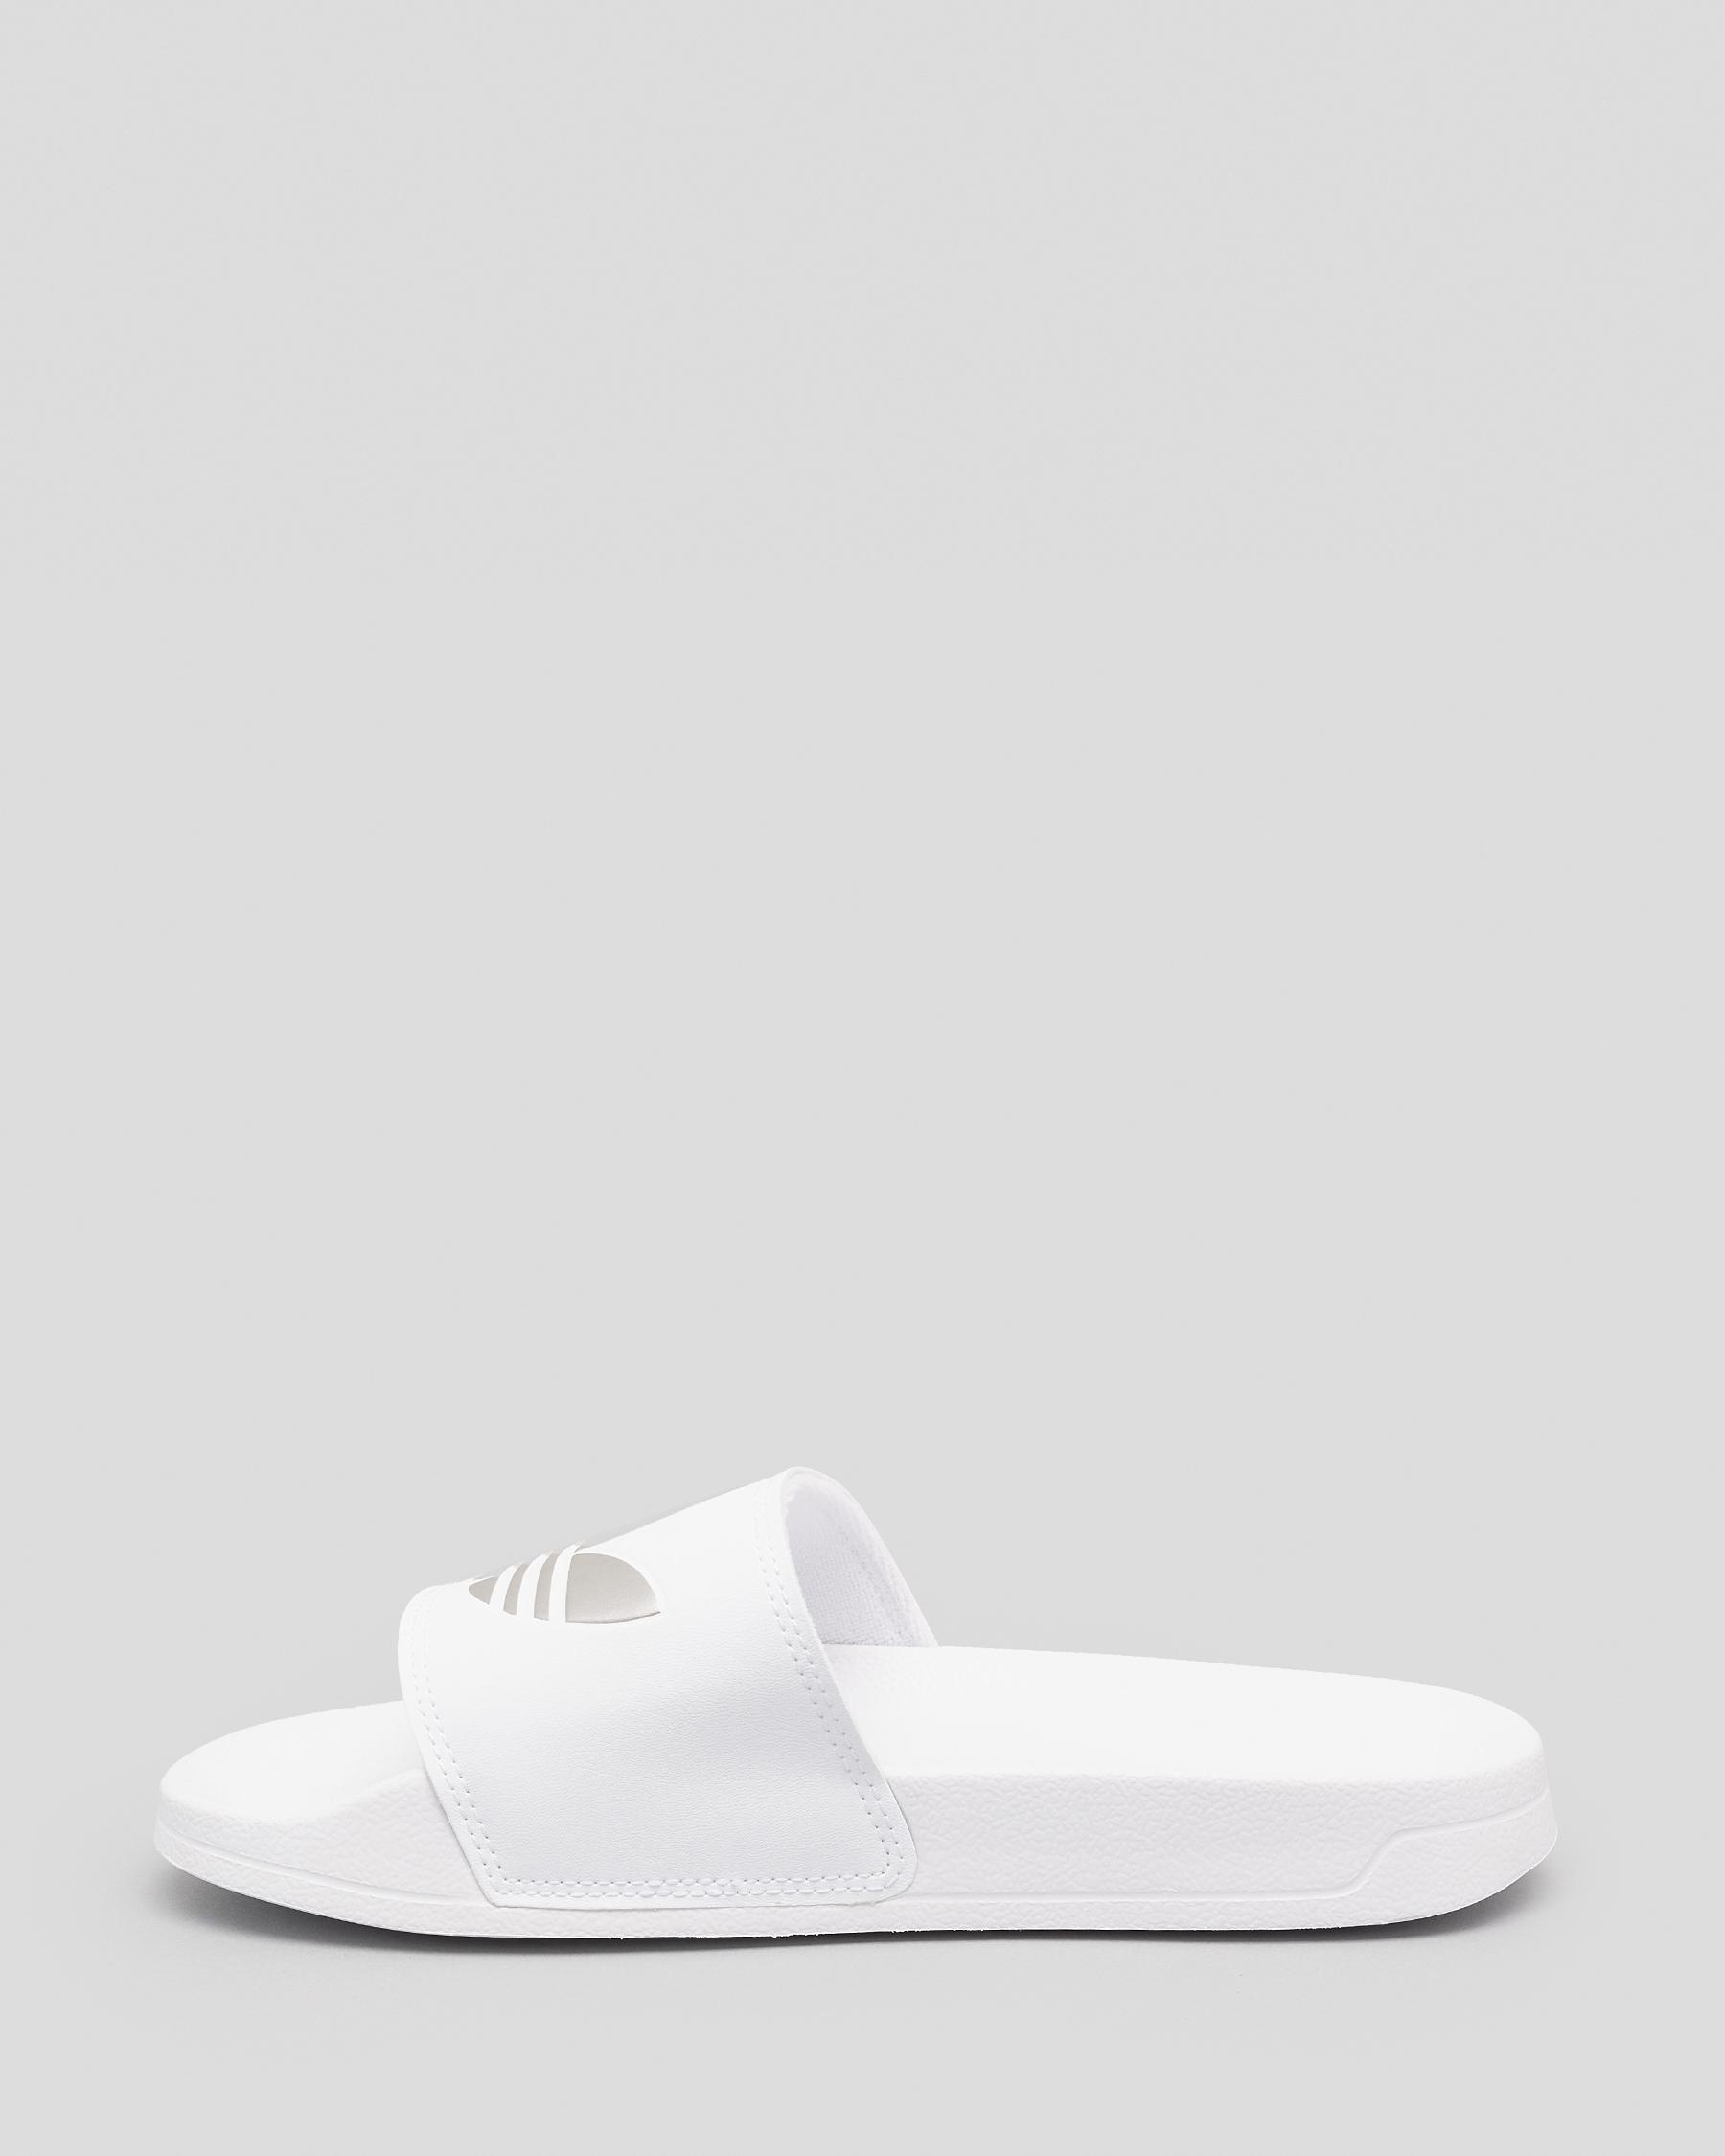 Adidas Adilette Lite Slide Sandals In White/silver - Fast Shipping ...